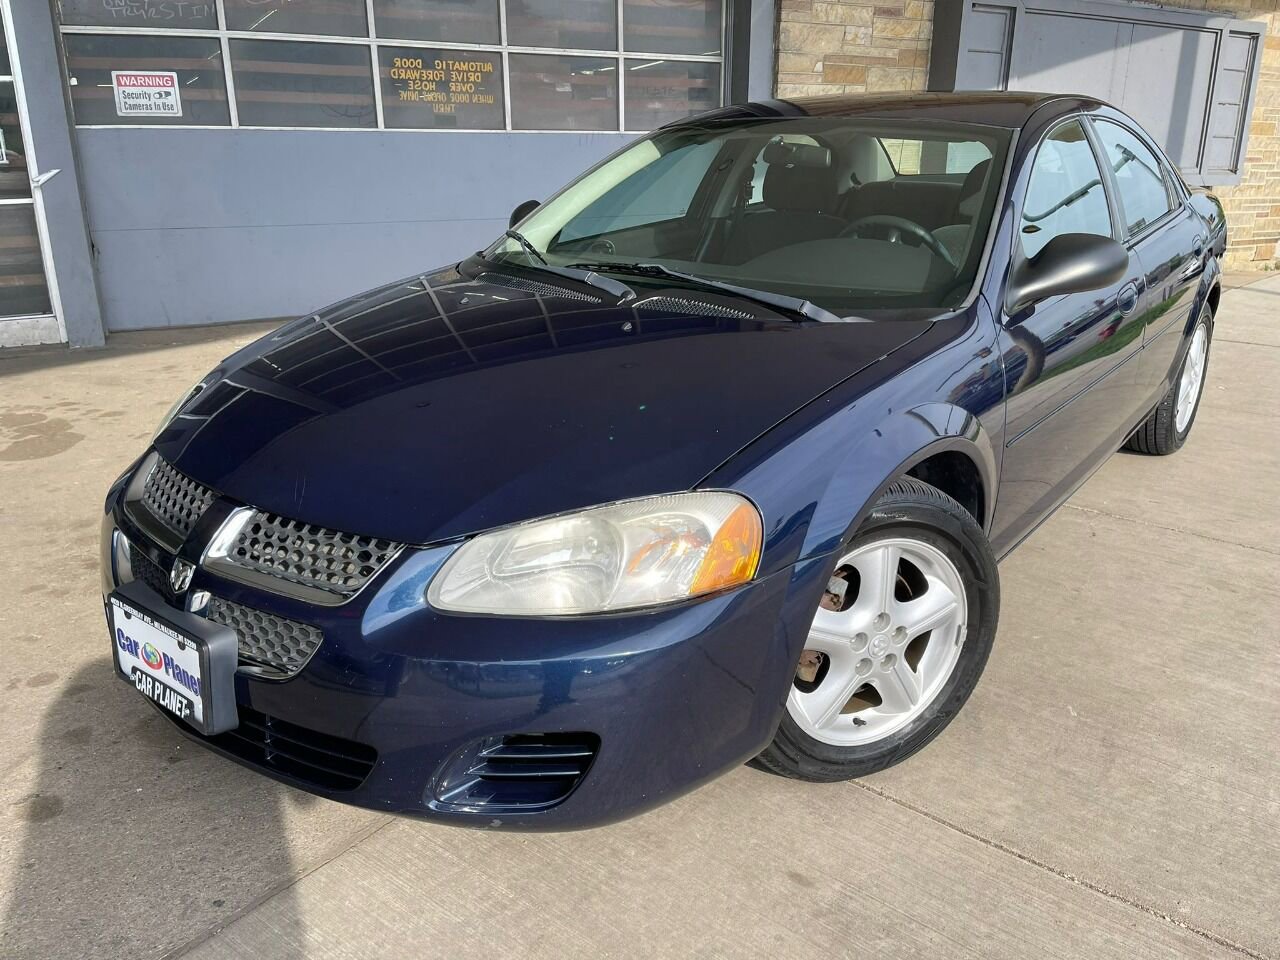 Used 2005 Dodge Stratus for Sale (Test Drive at Home) - Kelley Blue Book